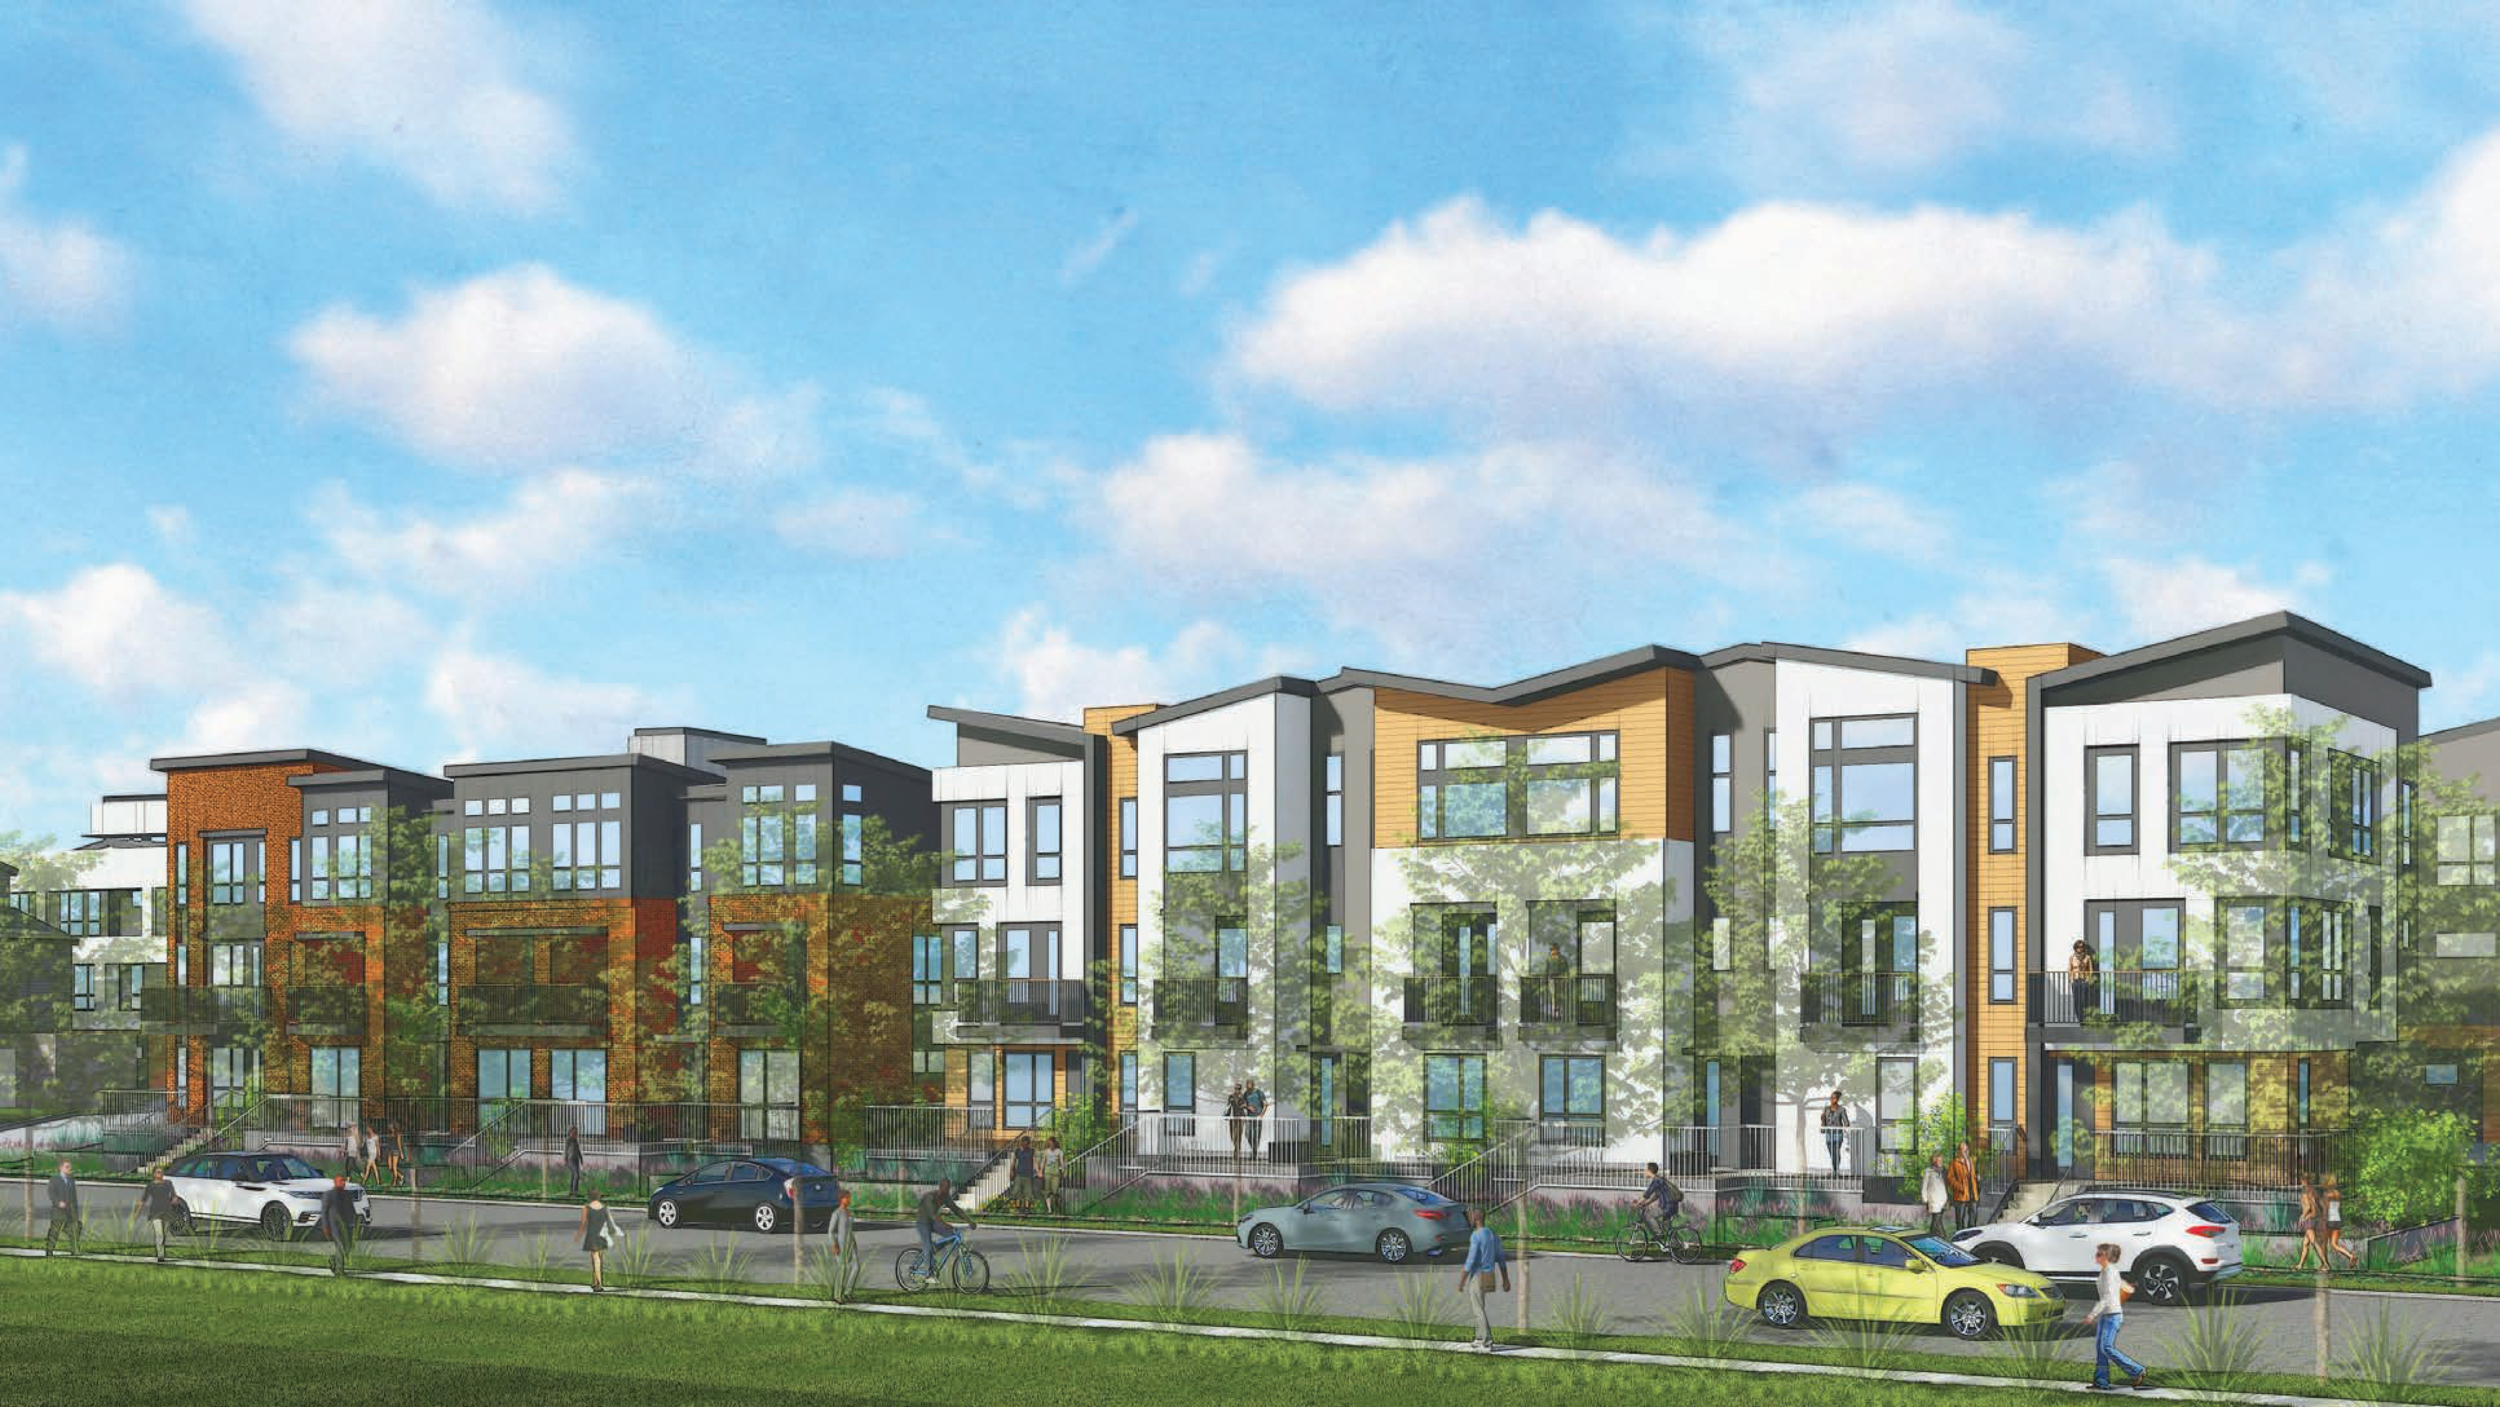 123 Independence Drive townhomes in Lot D, rendering by Studio T Square